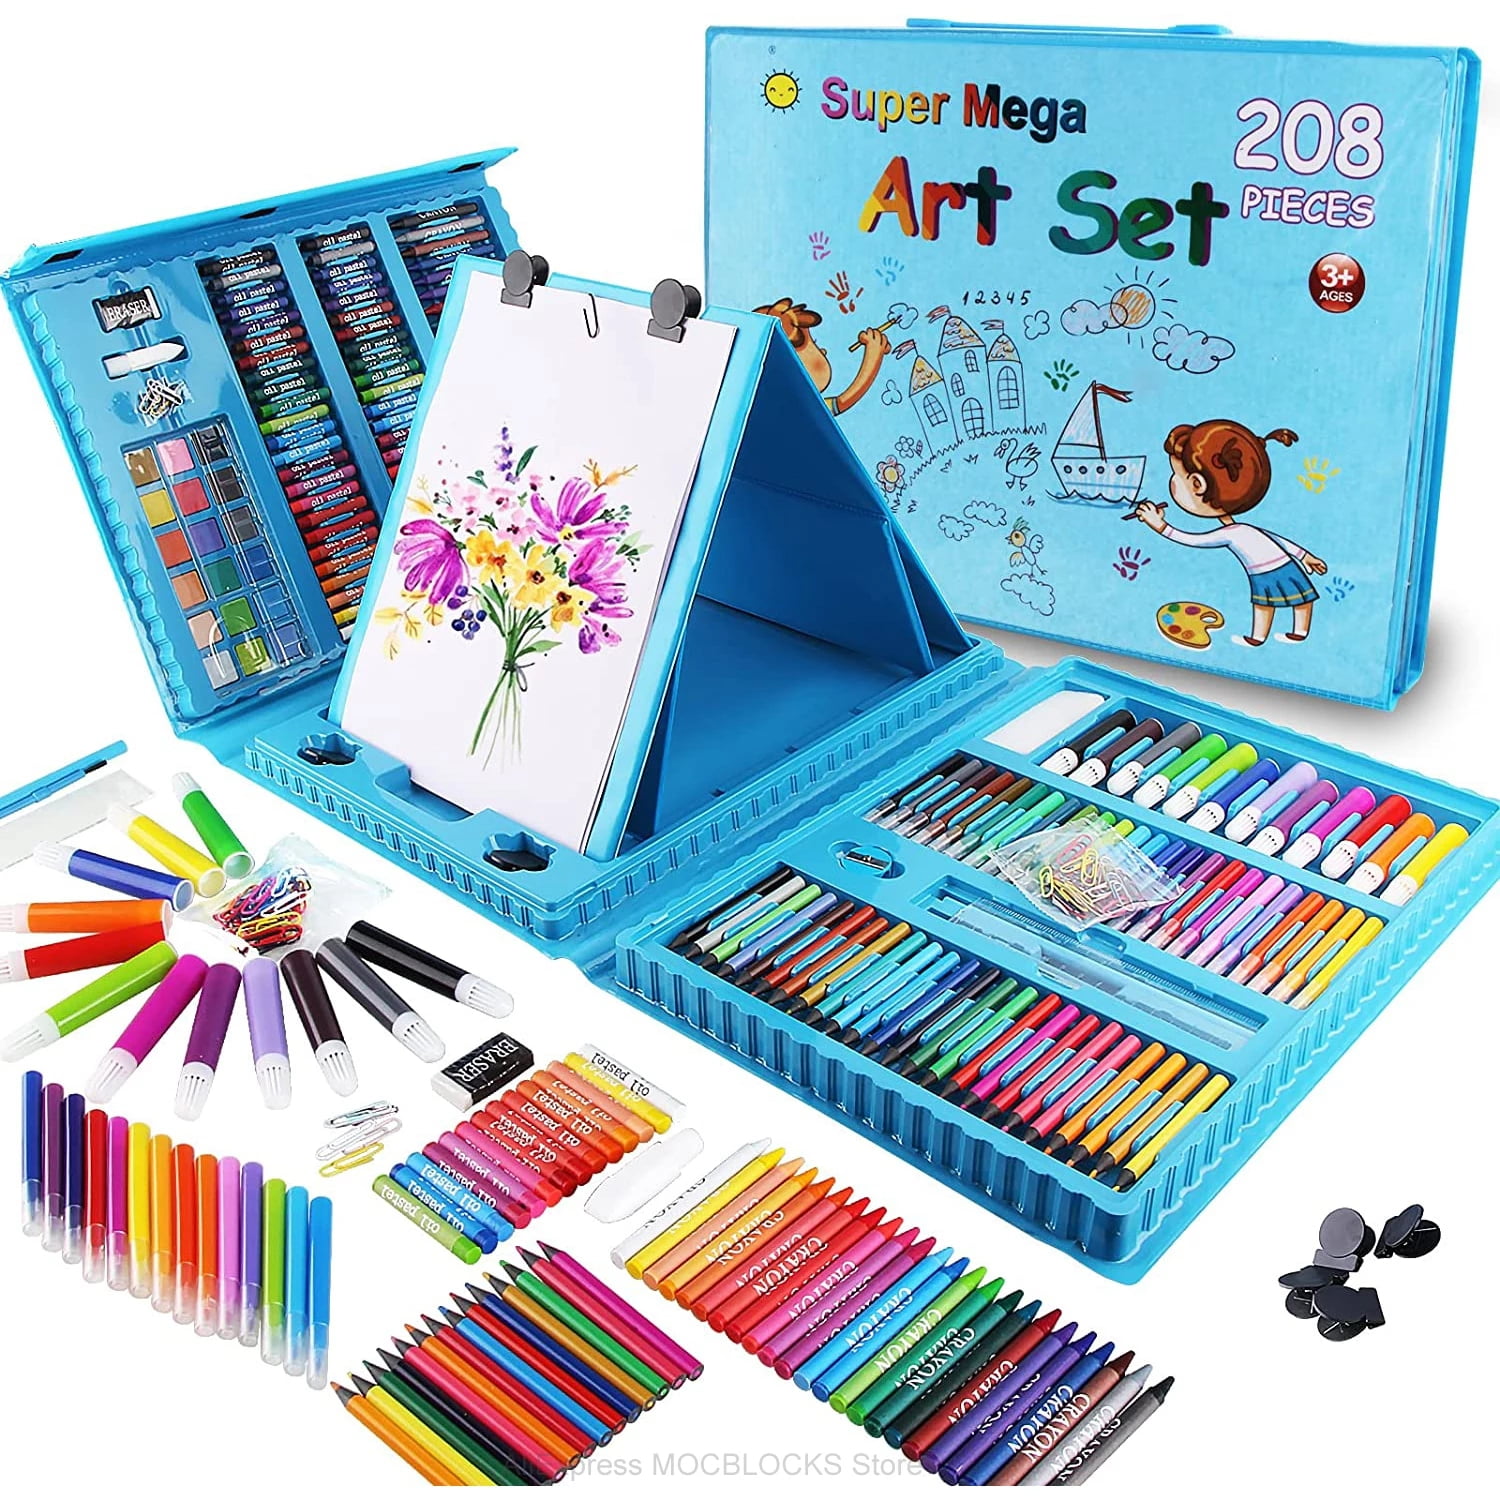 KIDDYCOLOR 85 Piece Wooden Art Set, Art Box Painting & Drawing Kit for Kids  with Oil Pastels, Colored Pencils, Watercolor Cakes, Paint Brushes, Art